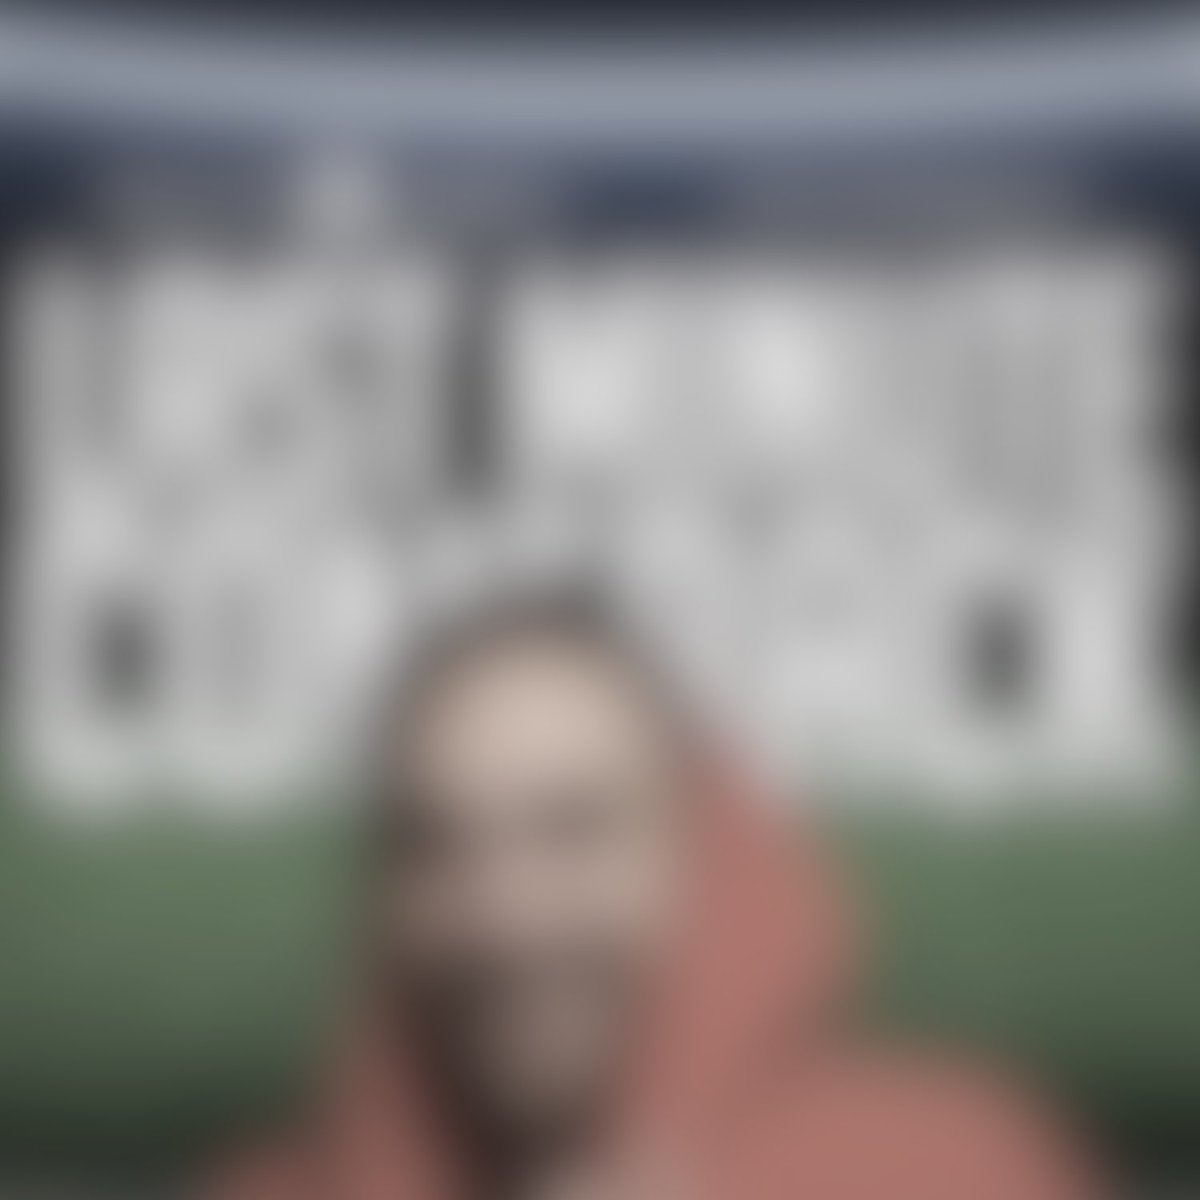 After doing NDL Overture and The Biggest Menace Series for @NikoOmilana. Another massive YouTuber reached out for an official theme song. Big surprise release coming this Friday, can you guess who it is?